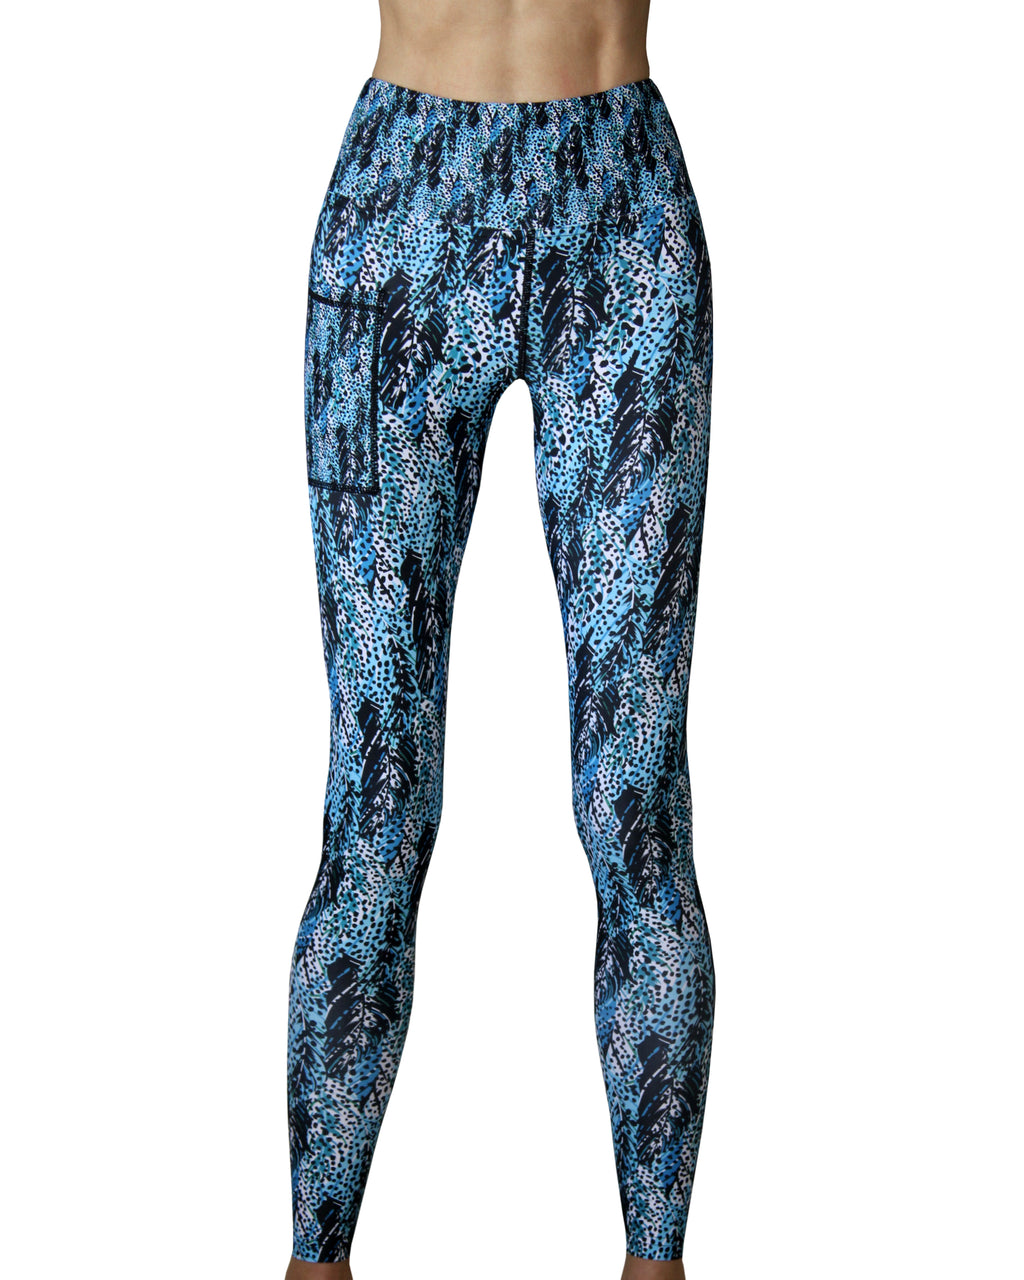 Black and blue leggings for women that runs, do yoga and exercise at the gym.  Made in Cape Town, South Arica.